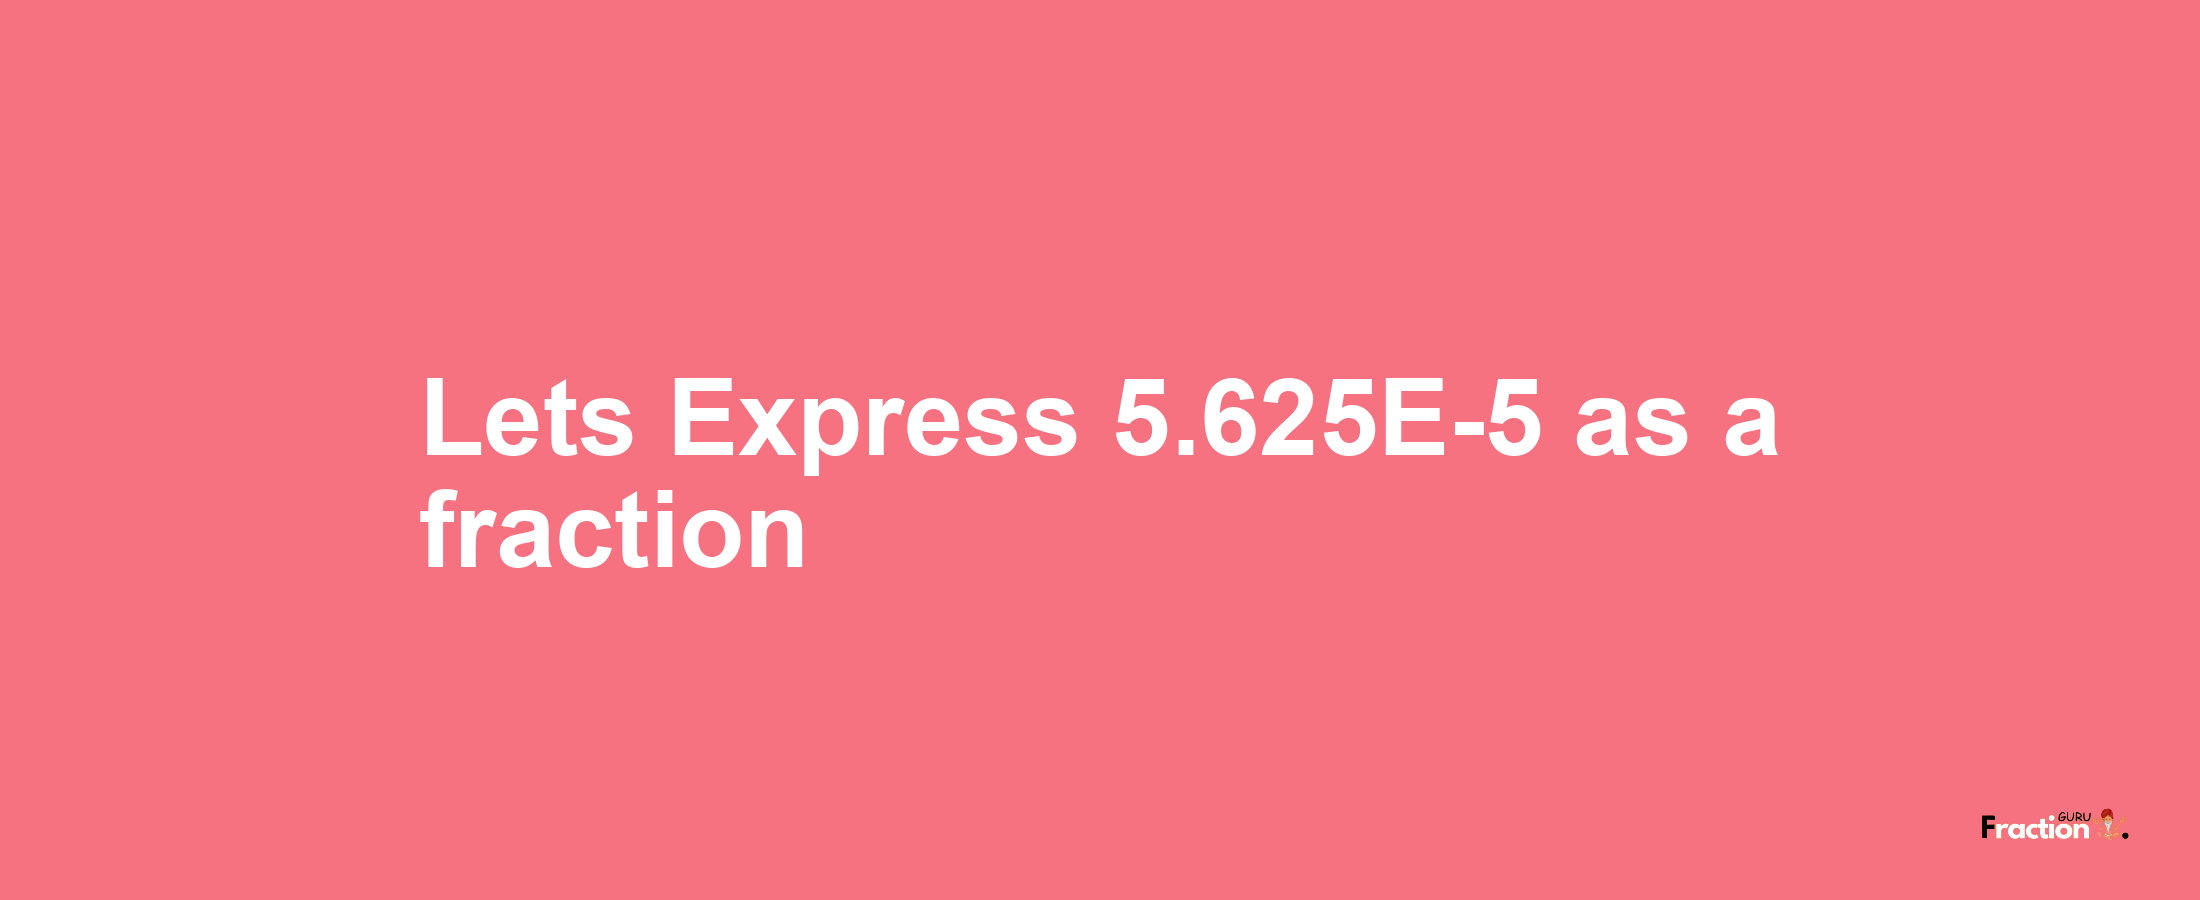 Lets Express 5.625E-5 as afraction